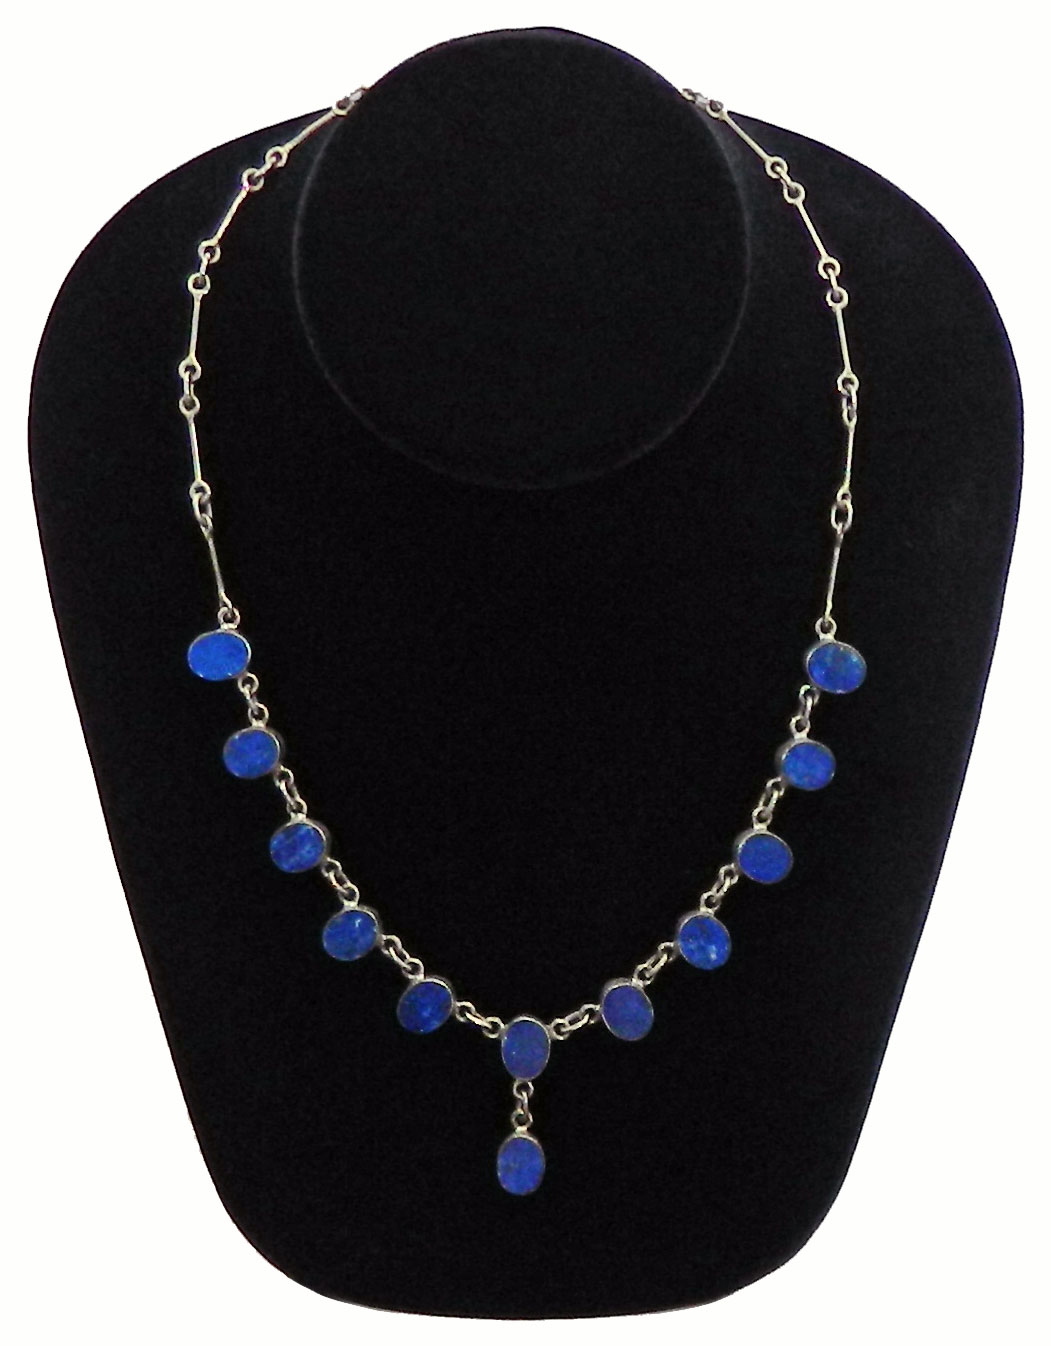 Sterling silver Lapis Lazuli necklace